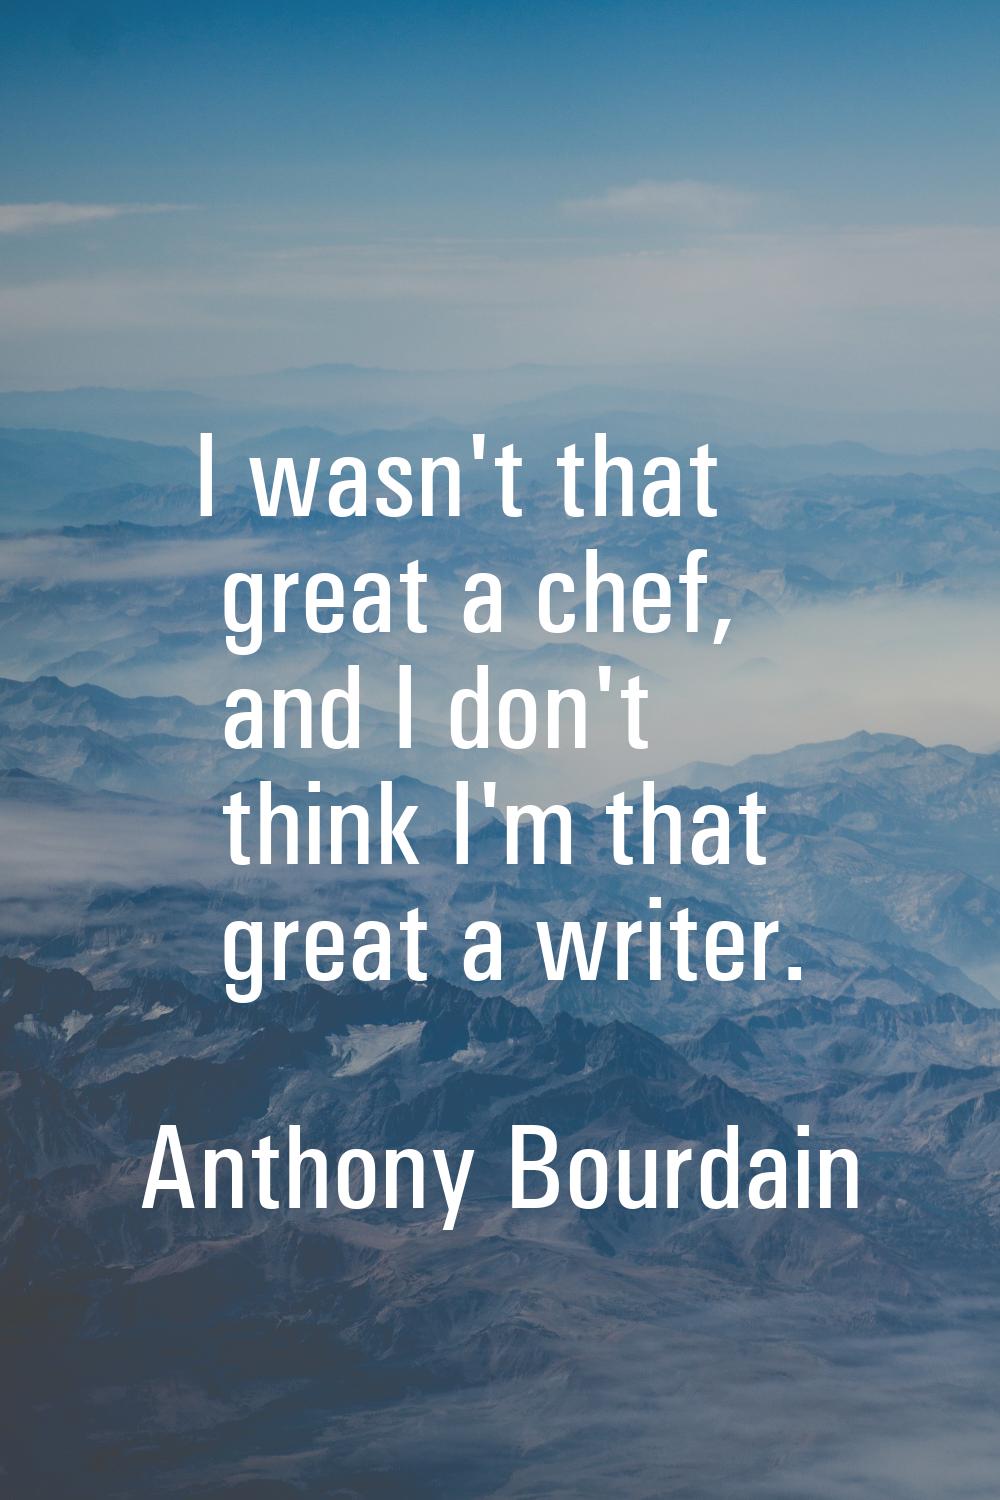 I wasn't that great a chef, and I don't think I'm that great a writer.